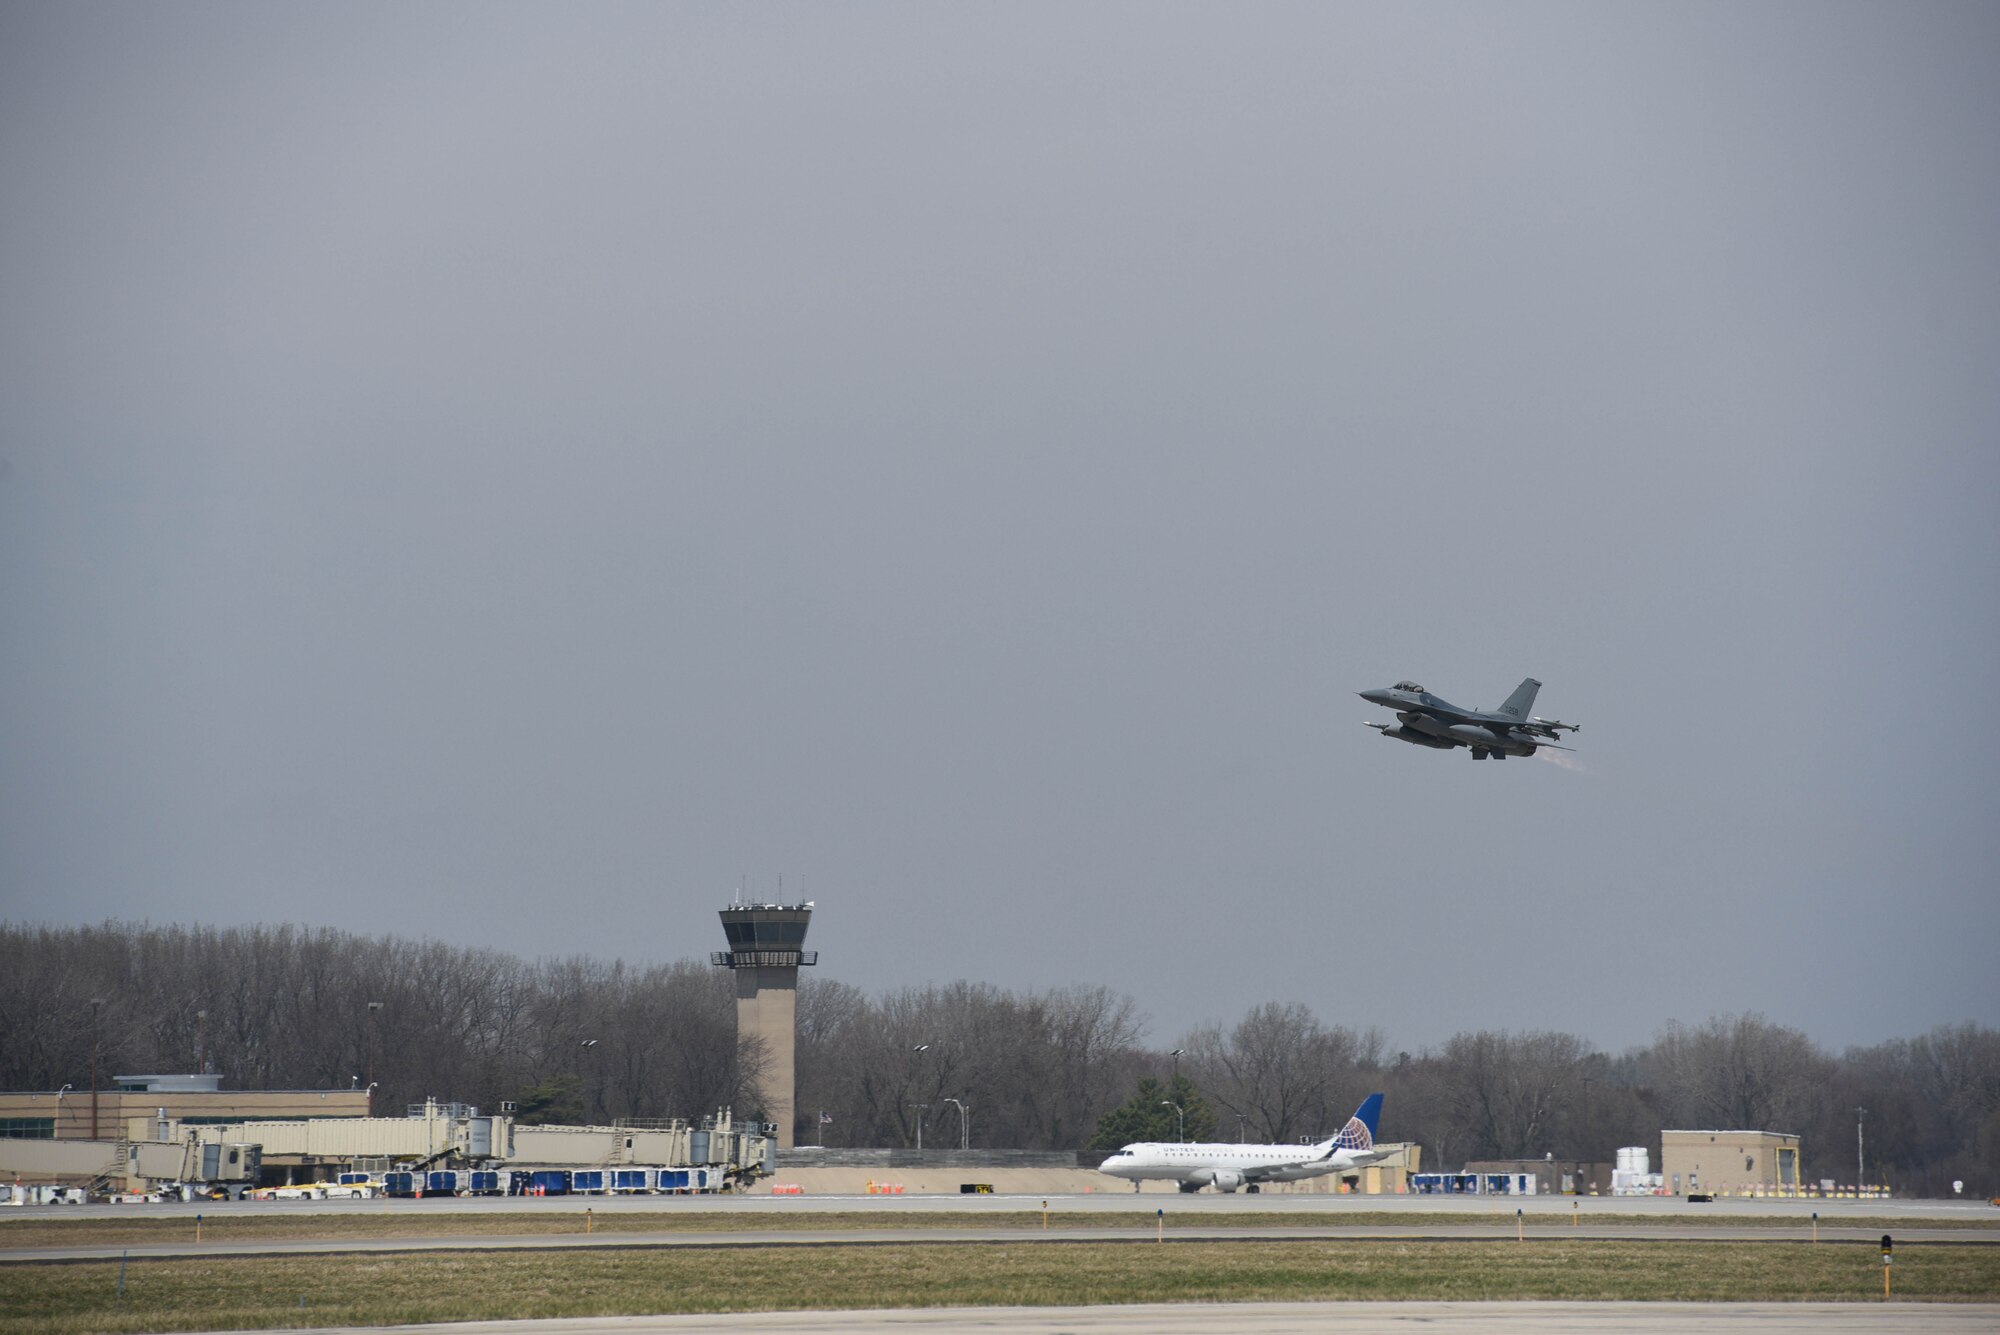 An F-16 Fighting Falcon from the 115th Fighter Wing takes off at Dane County Regional Airport, Madison, Wisconsin April 7, 2020.